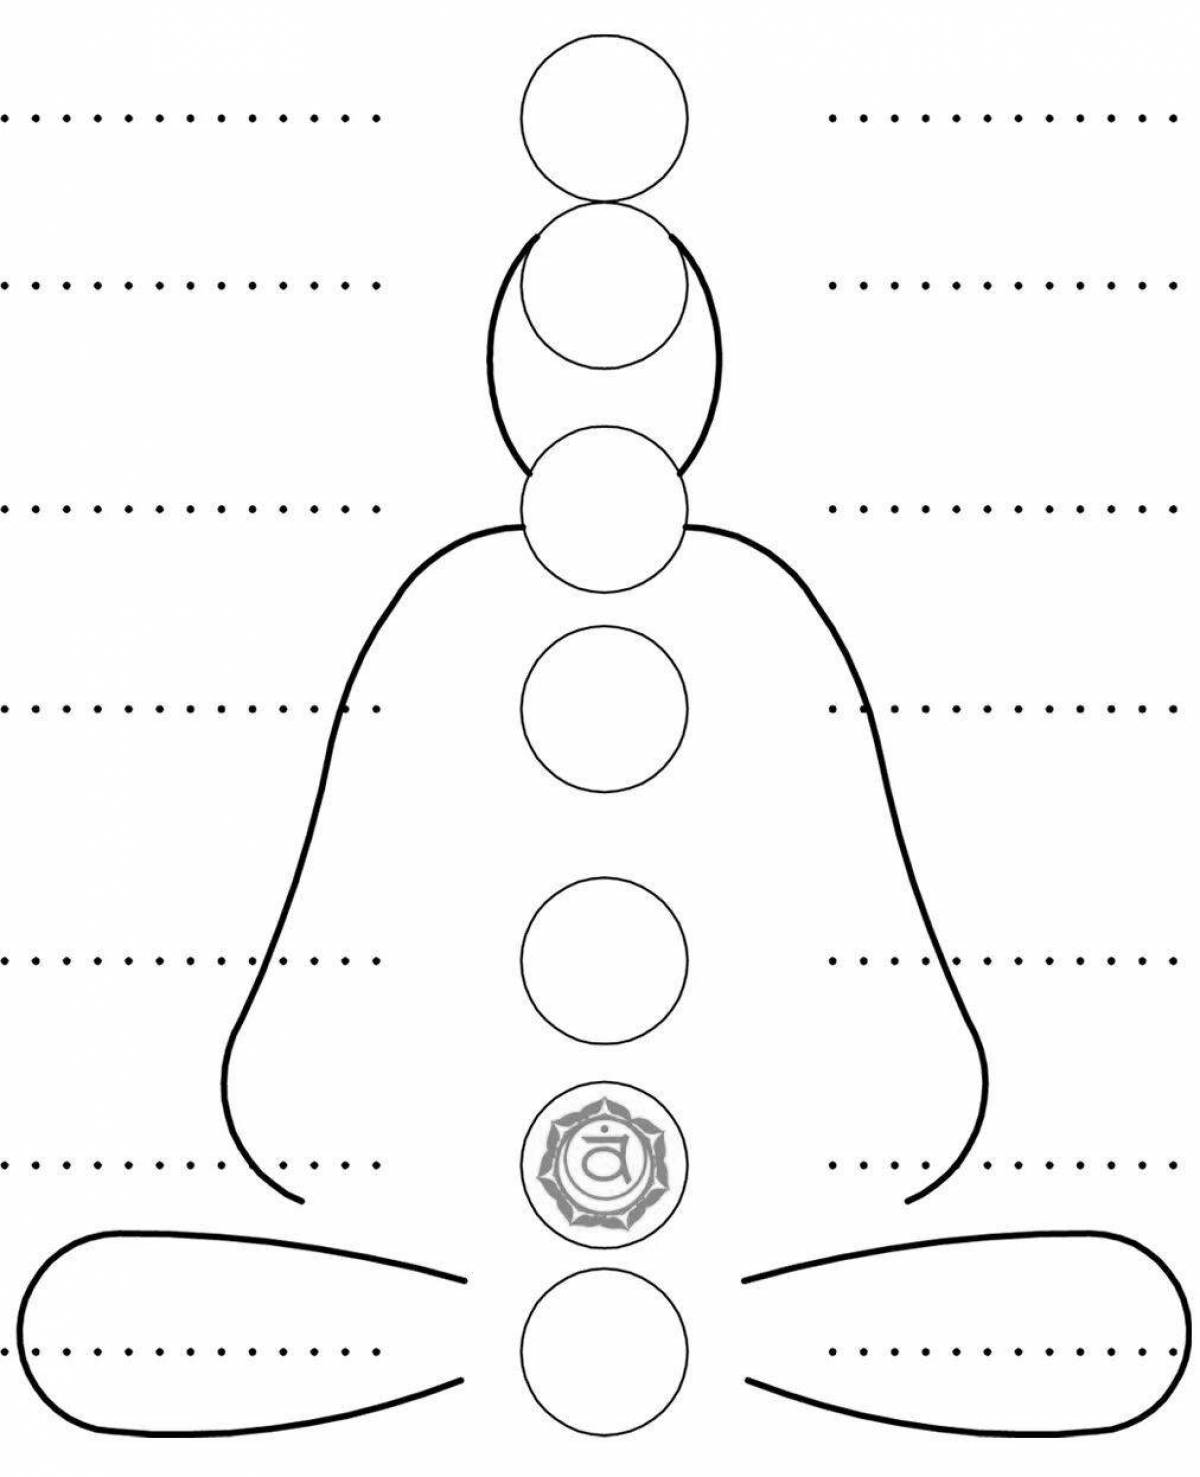 Chakras sublime coloring page